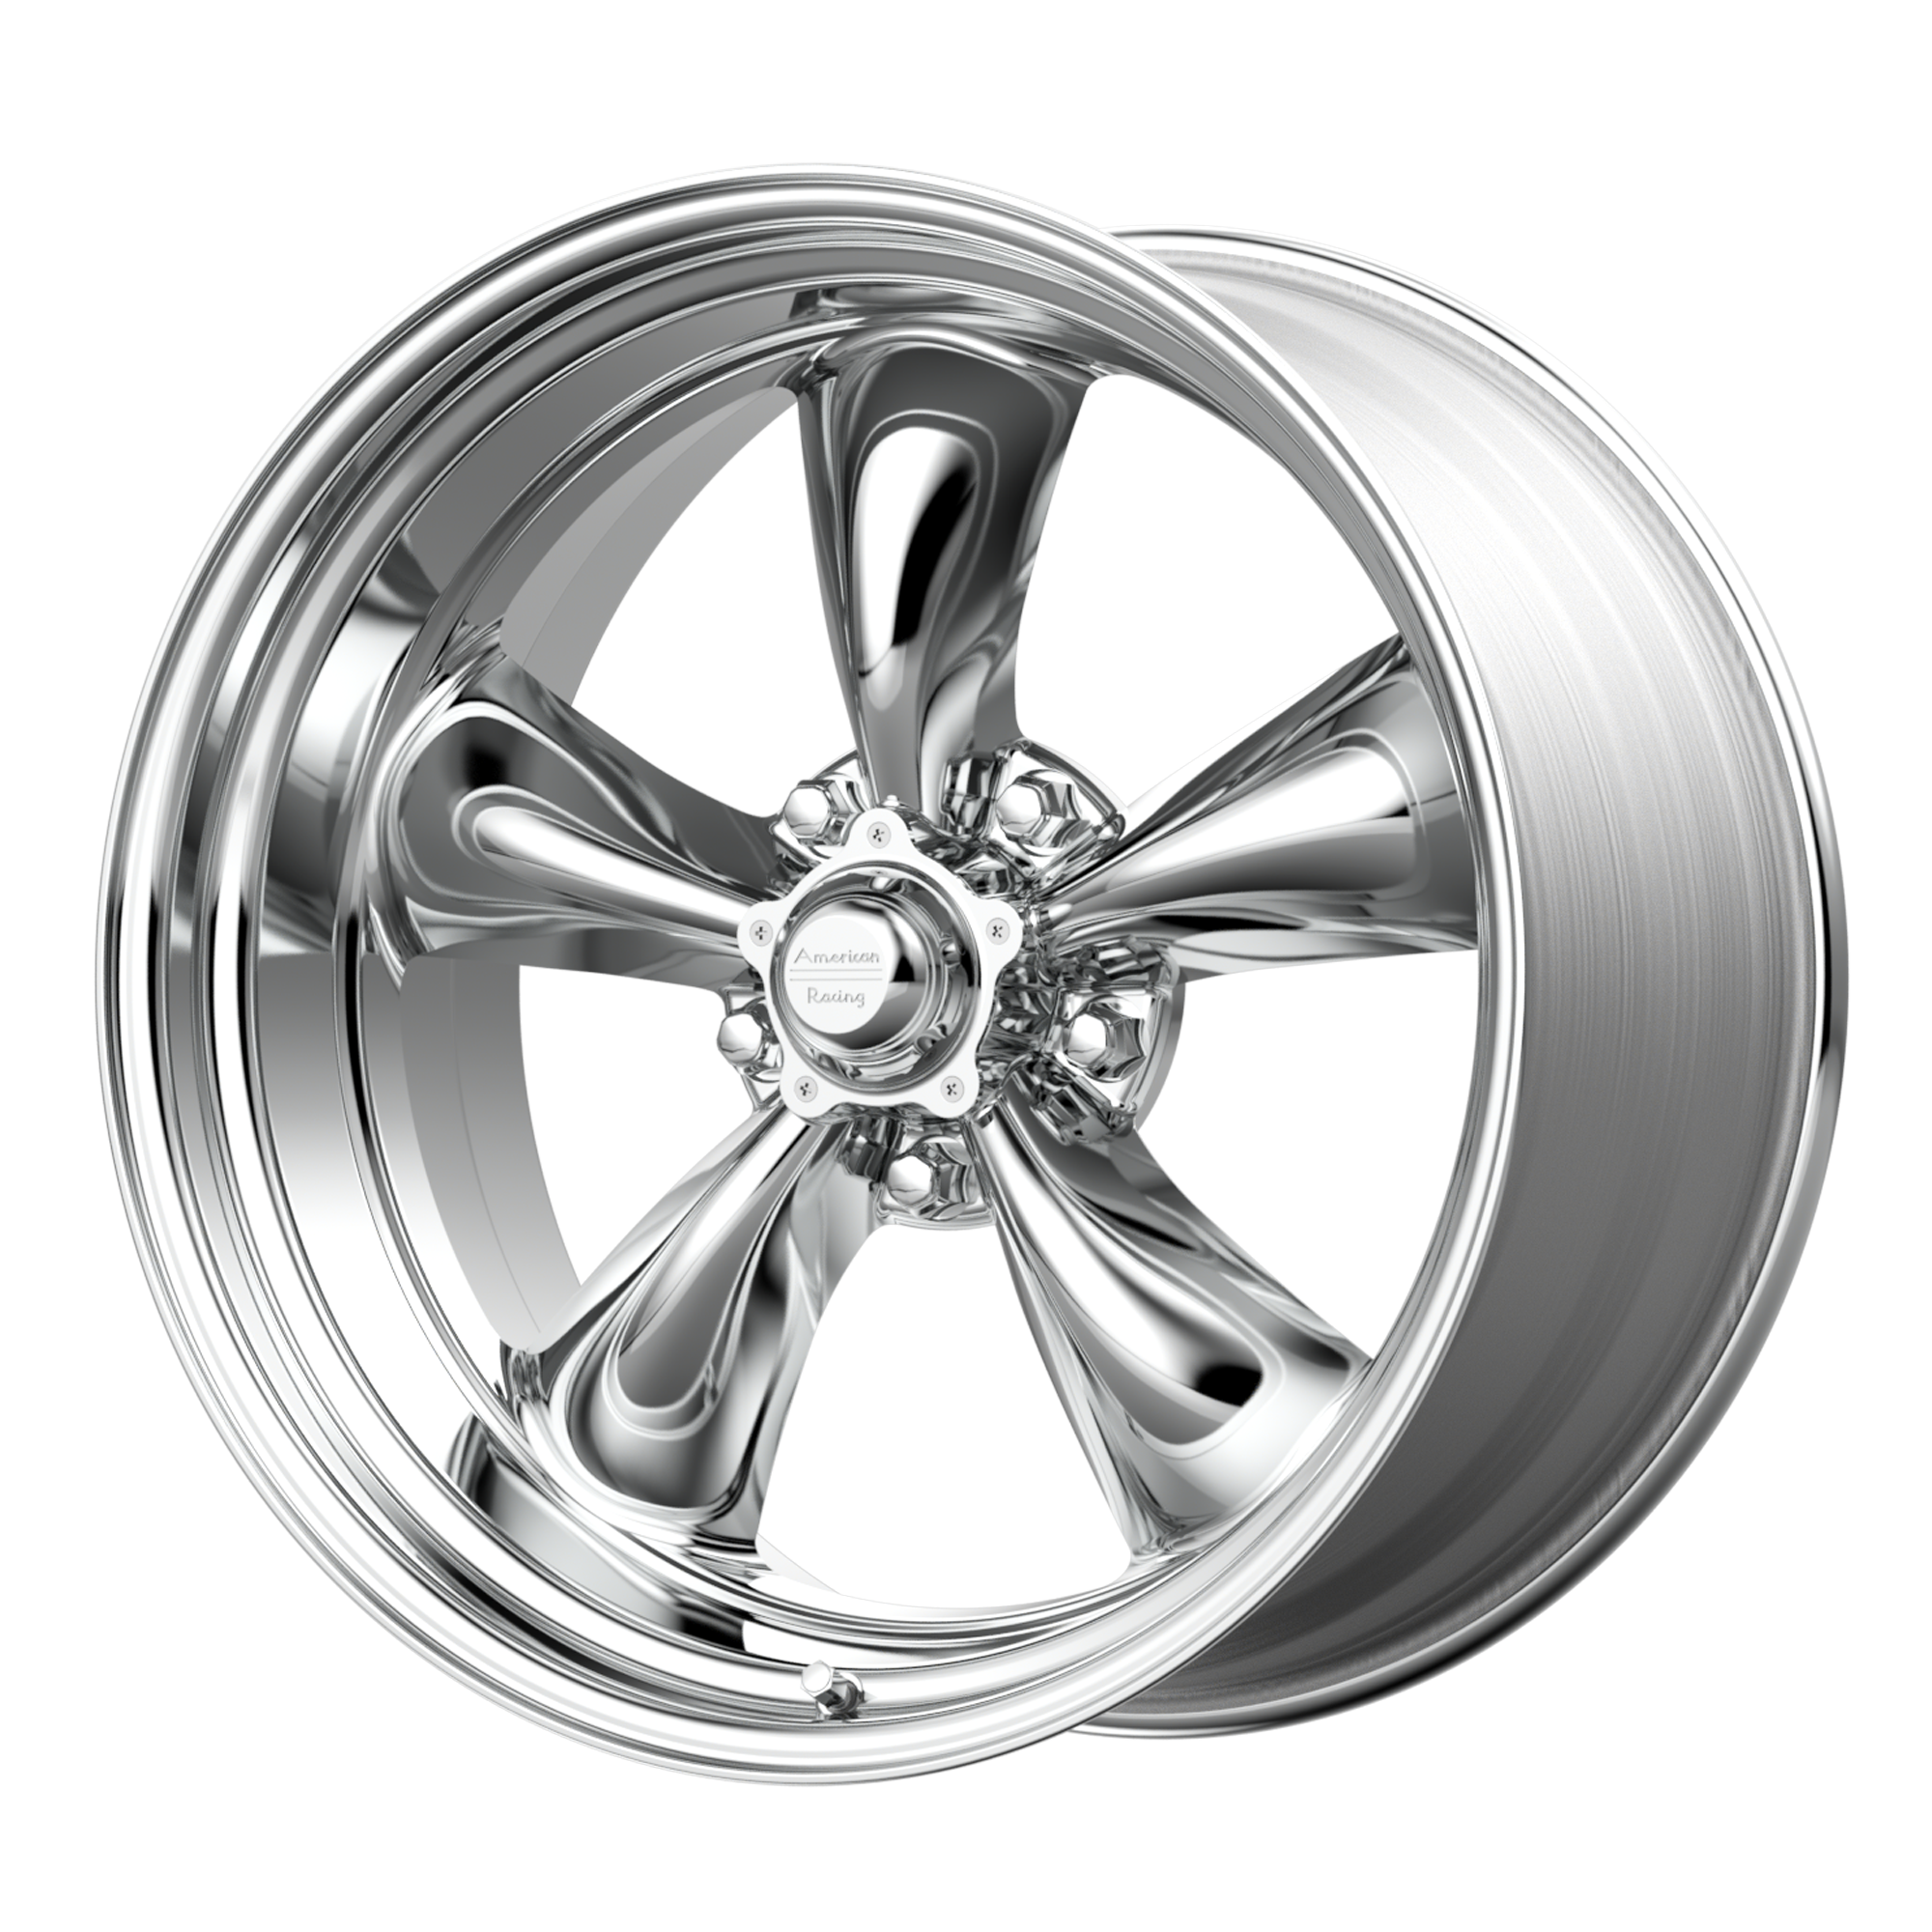 TORQ THRUST II 1 PC 15x4 5x114.30 POLISHED (-25 mm) - Tires and Engine Performance